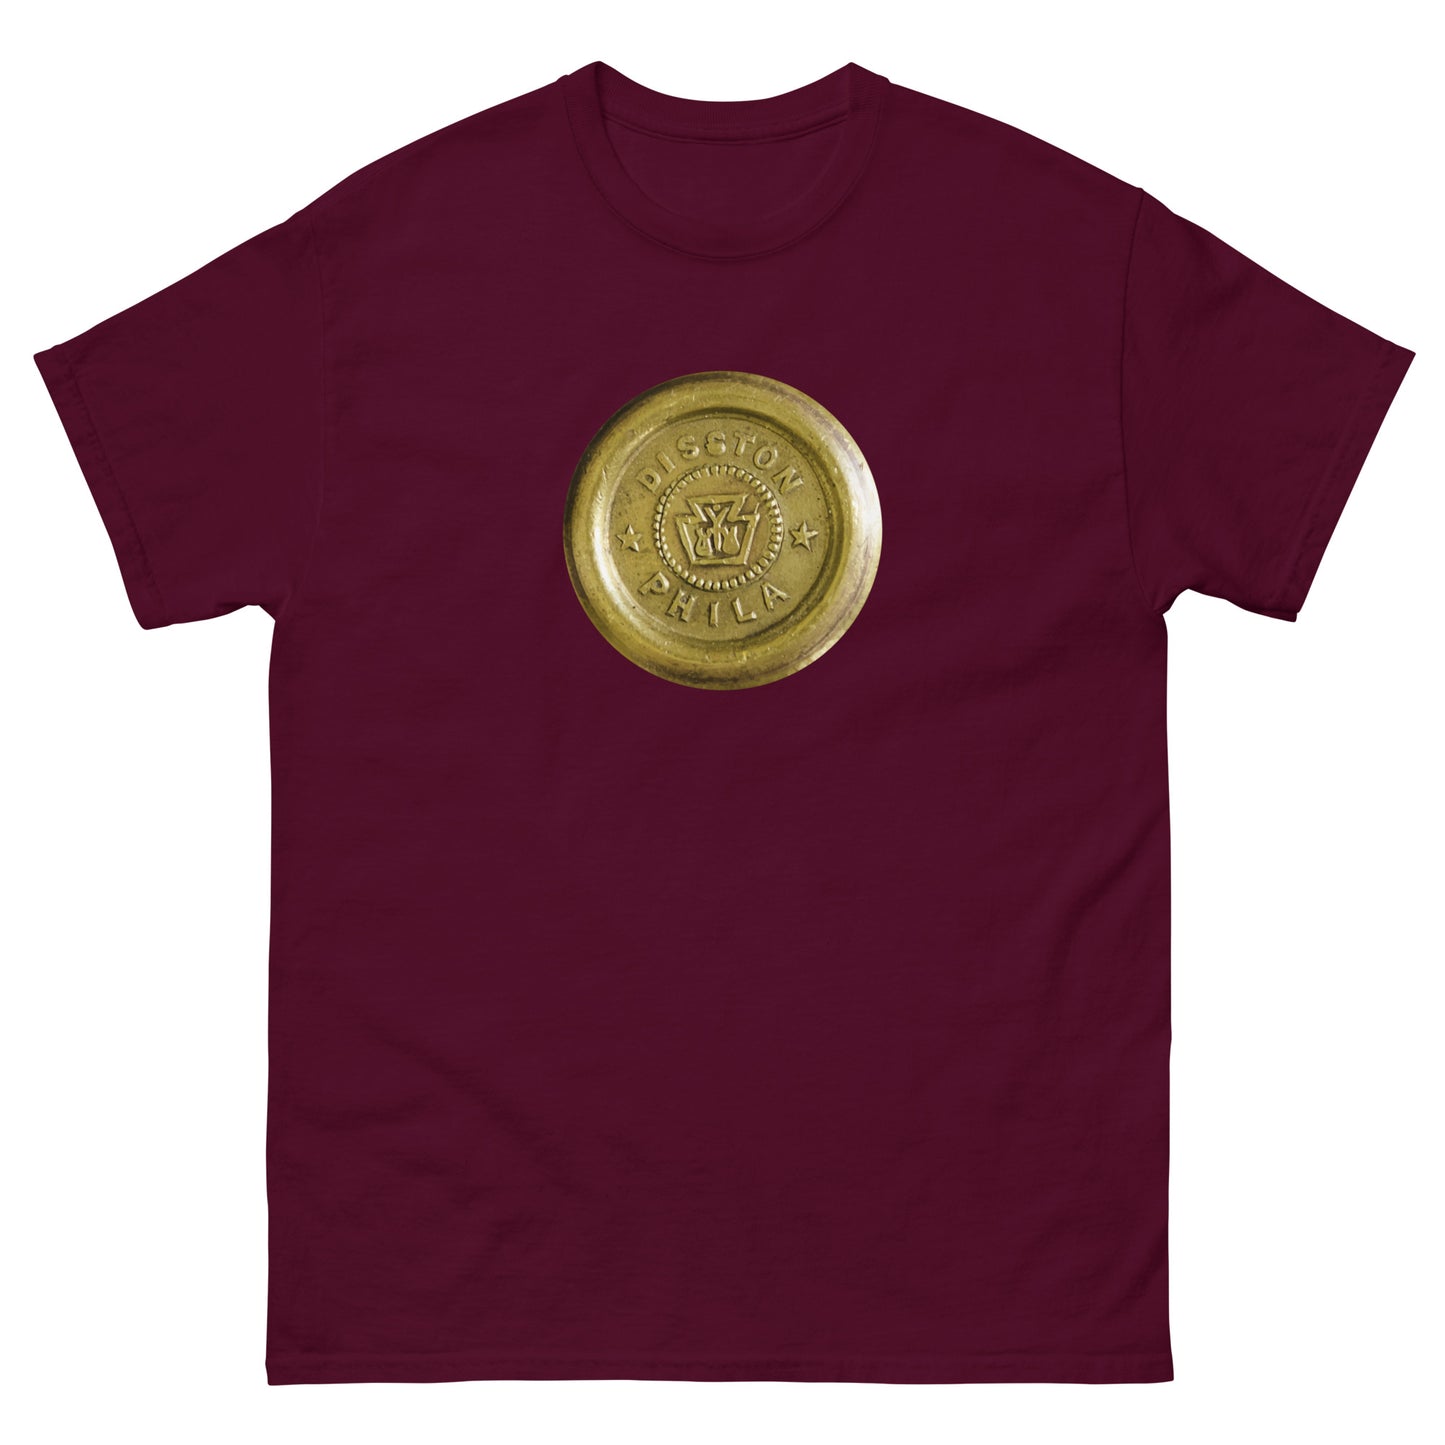 Disston Hand Saw Medallion Woodworking T-Shirt (Multiple Colors)